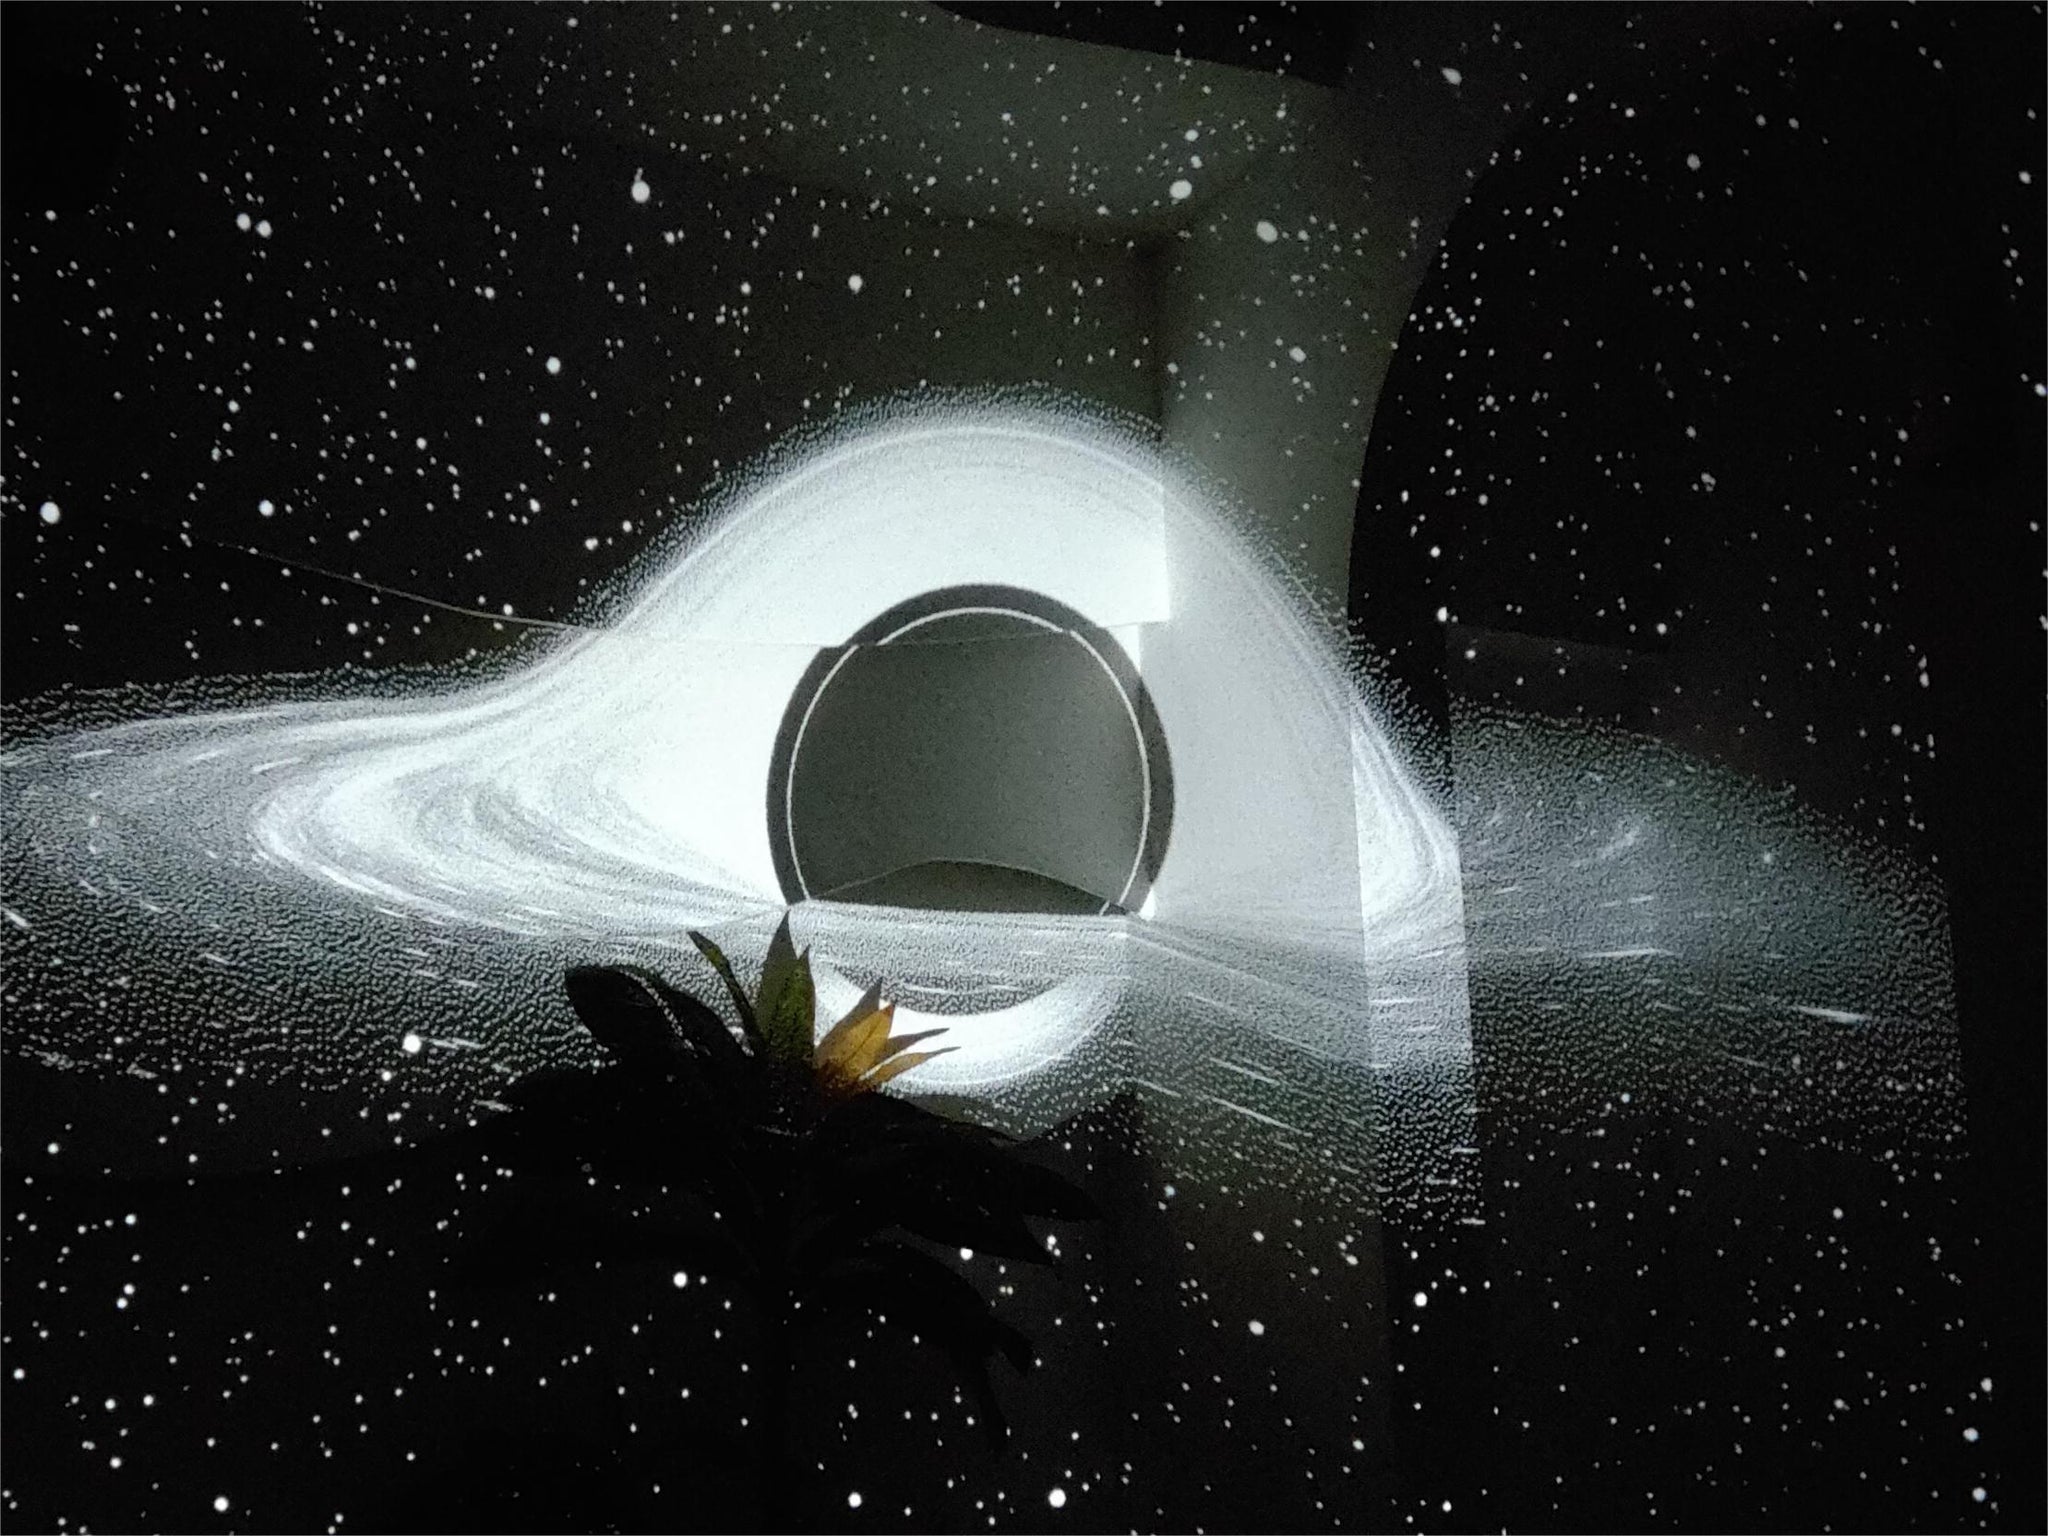 The black hole projection effect